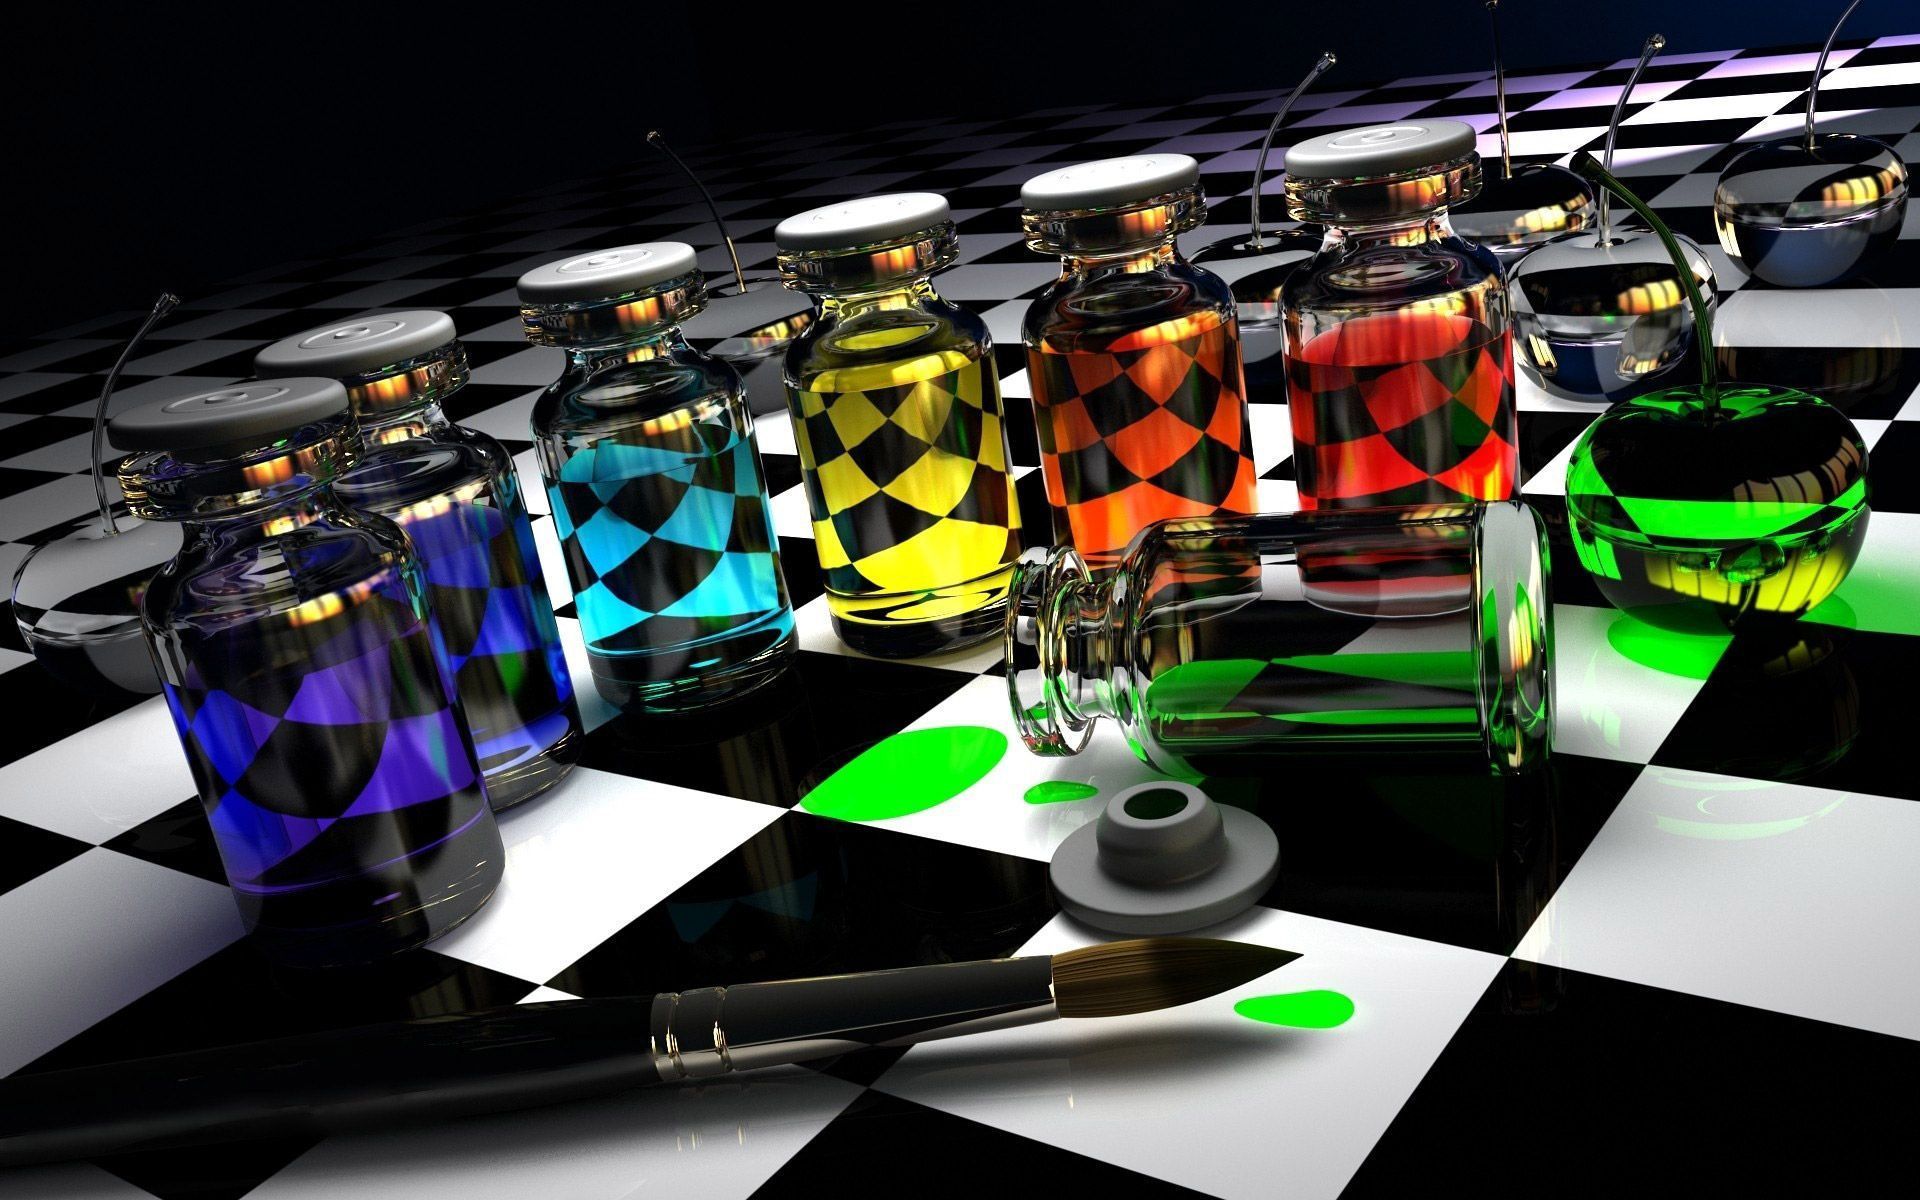 colored glass on a chess board | wallpapers55.com - Best ...